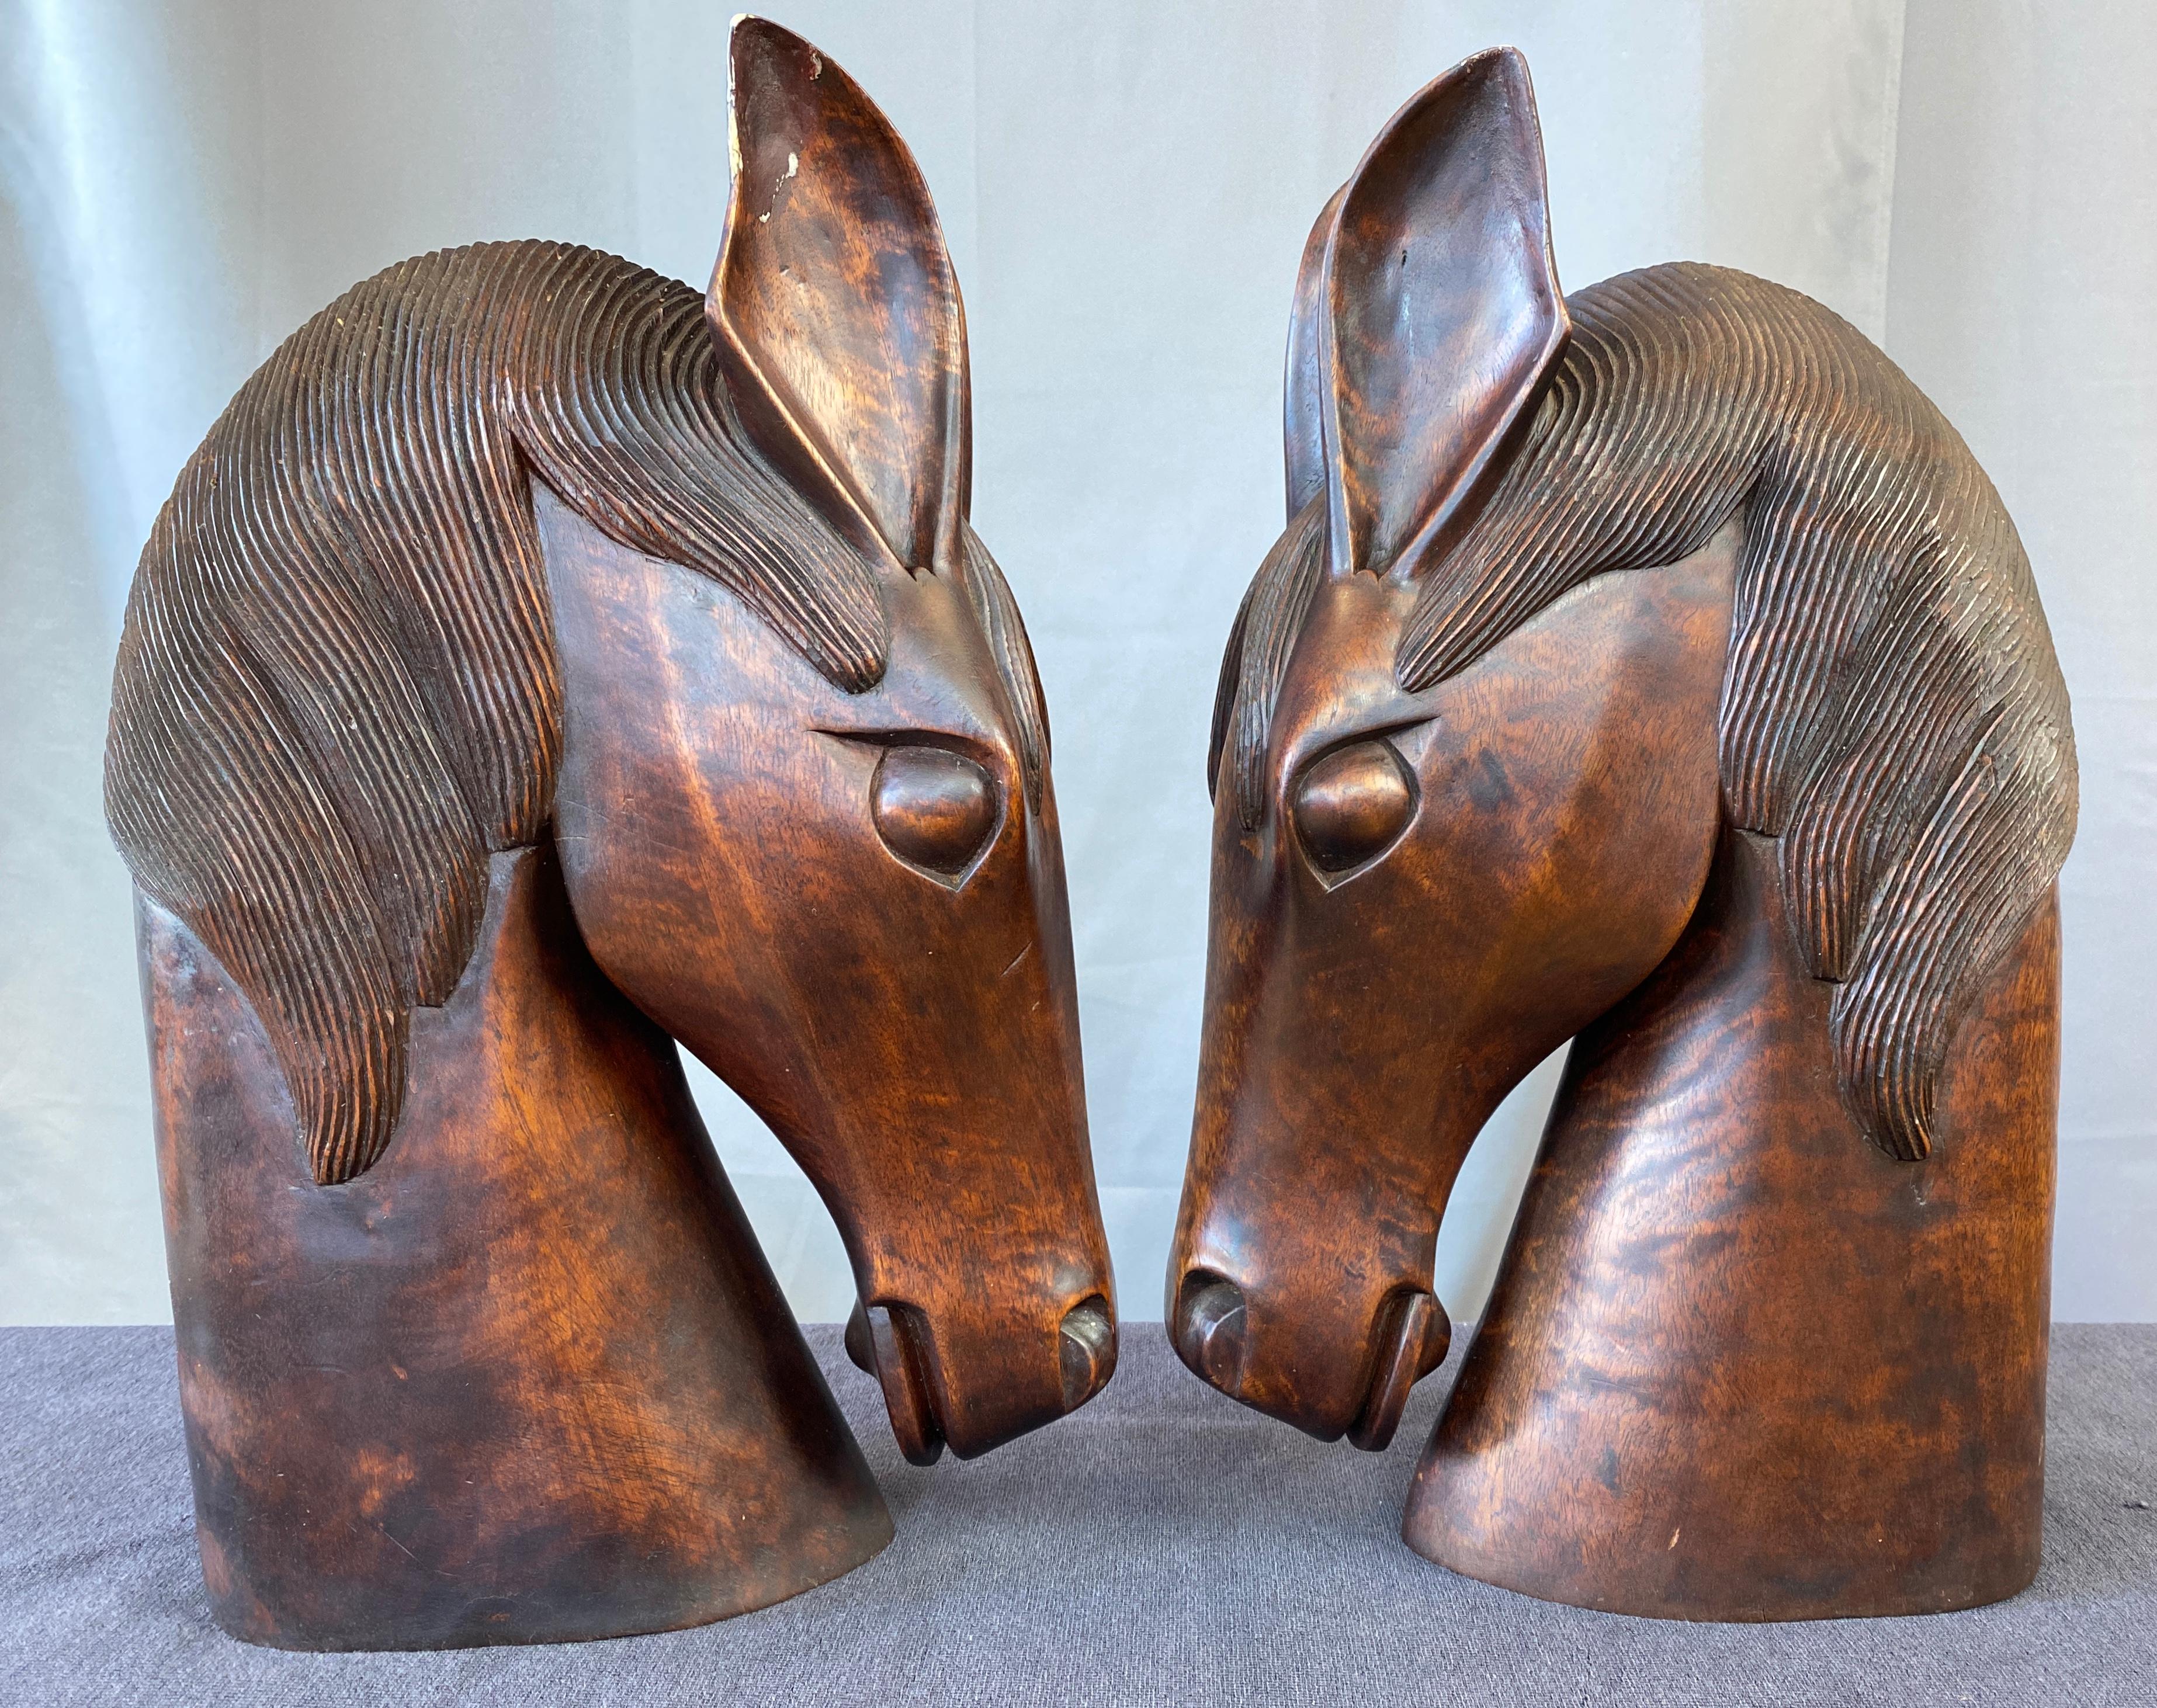 Pair of Carved Wood Horse Heads (Holz)